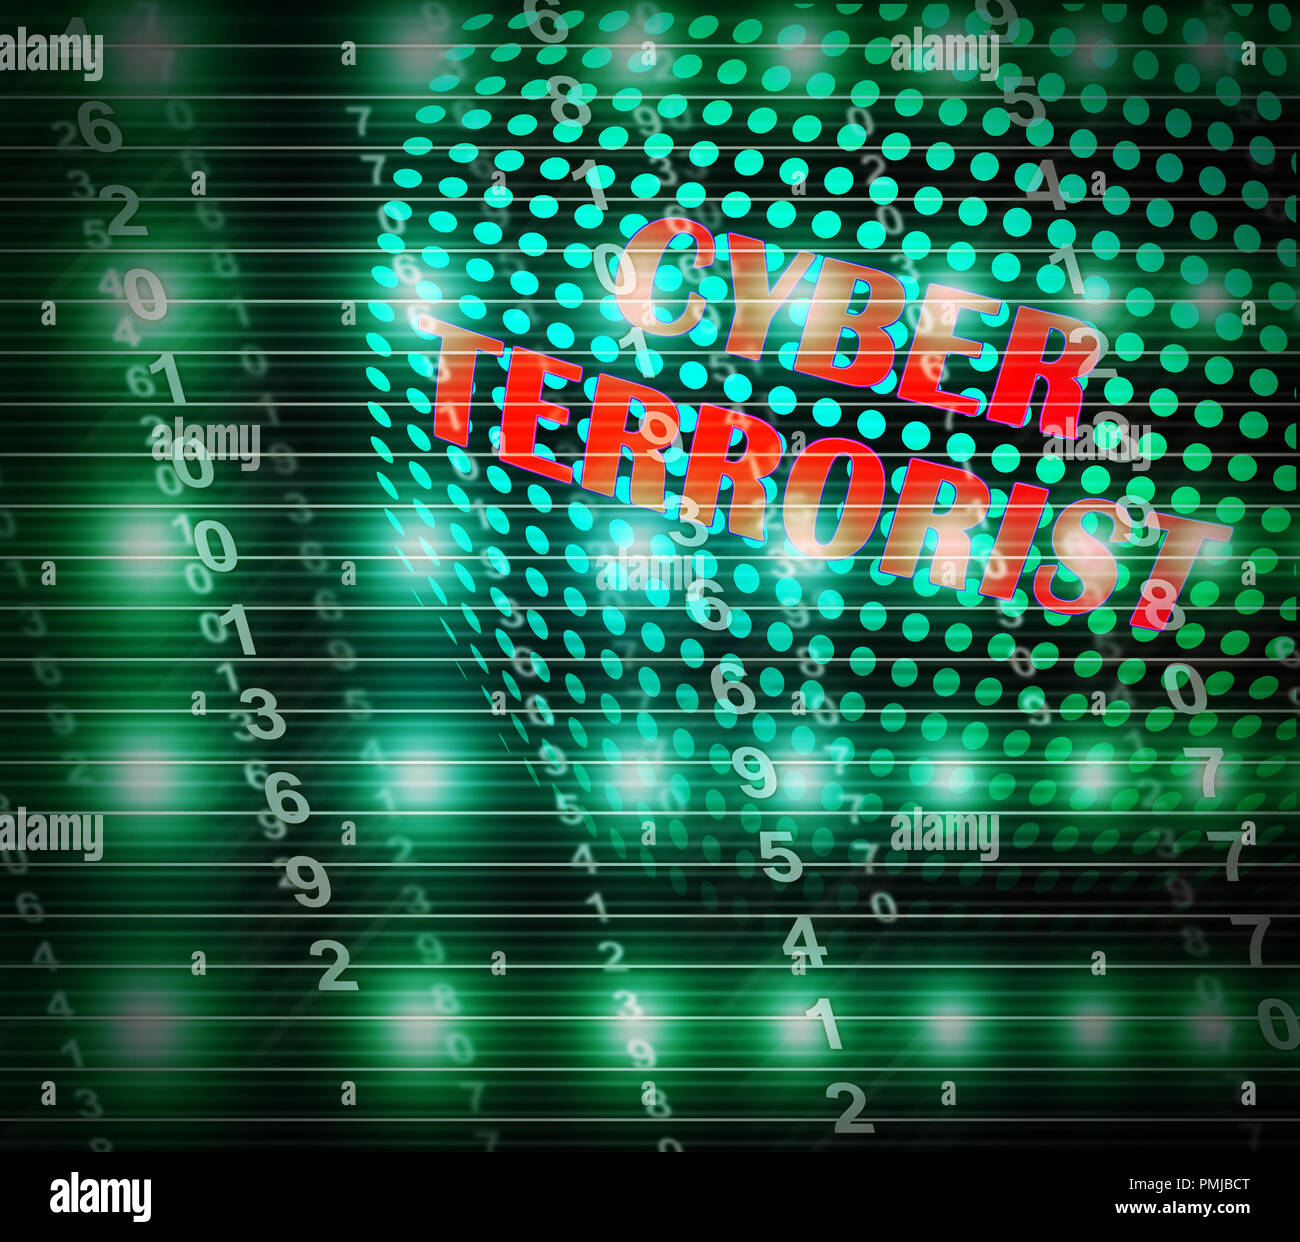 Cyber Terrorist Extremism Hacking Alert 3d Illustration Shows Breach Of Computers Using Digital Espionage And Malware Stock Photo